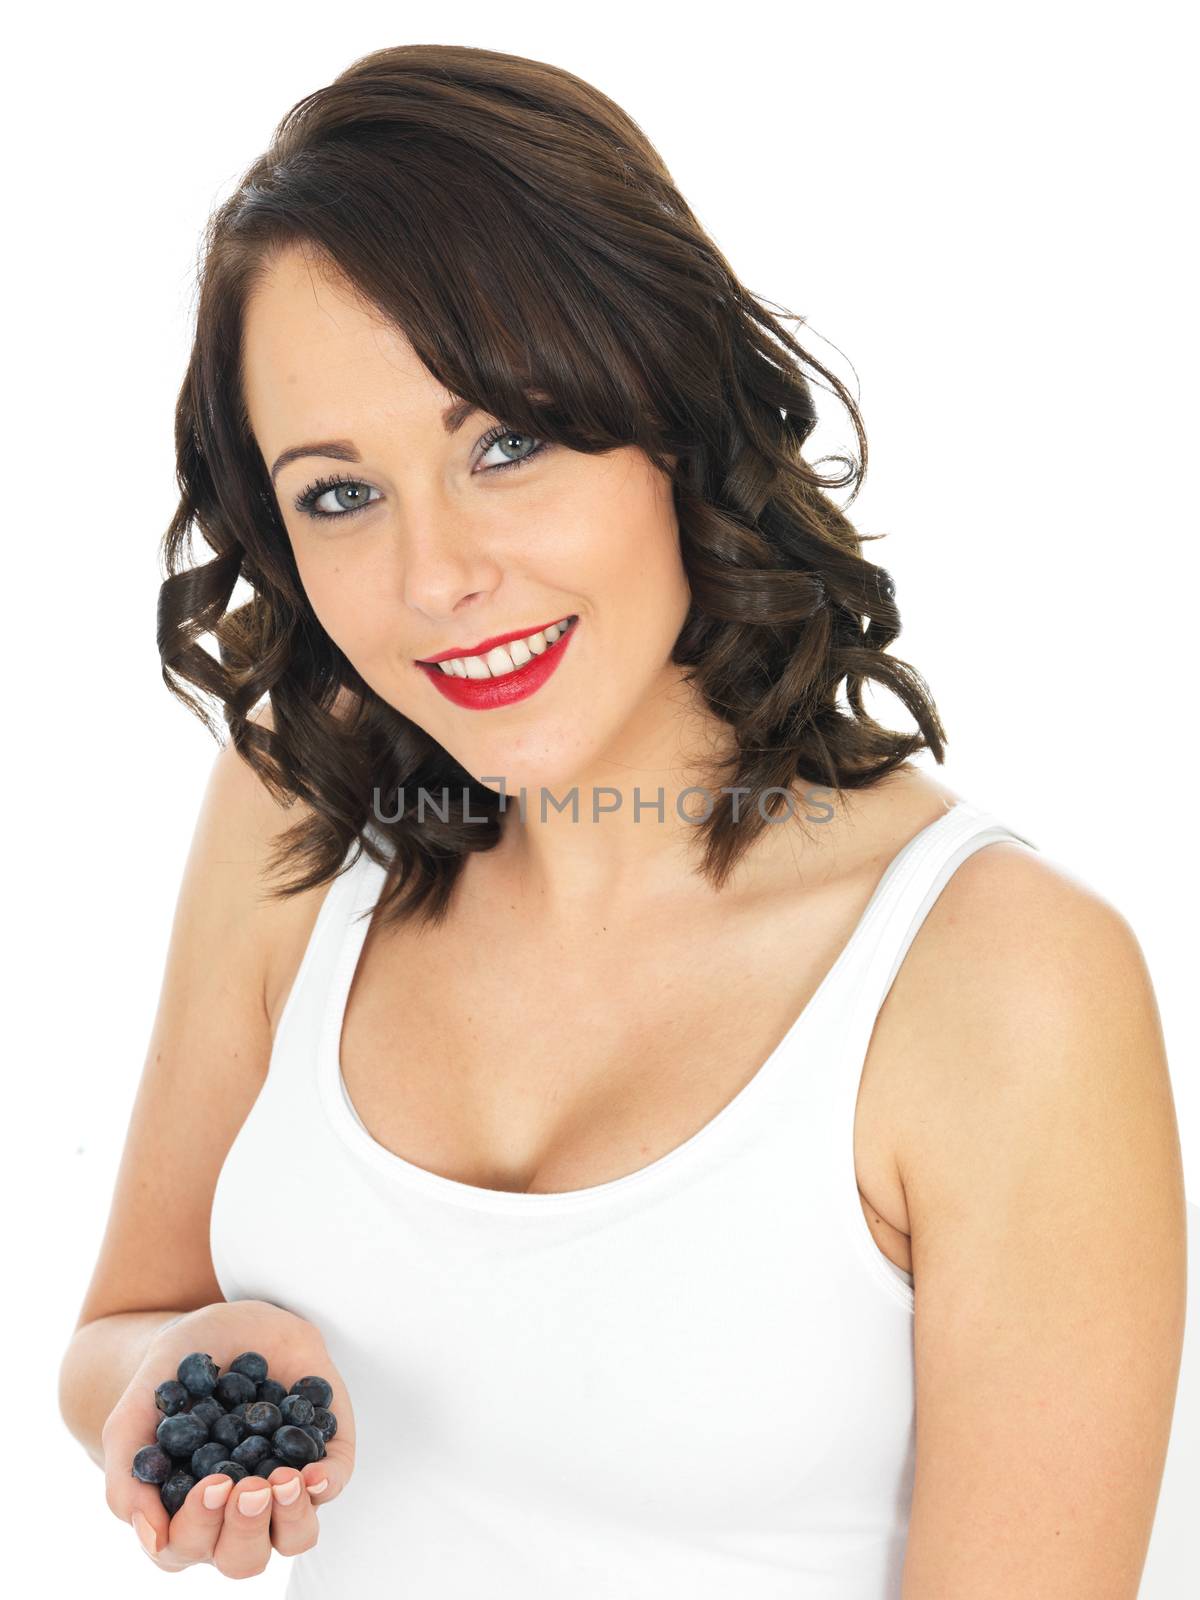 Young Woman Holding a Handful of Blueberries by Whiteboxmedia